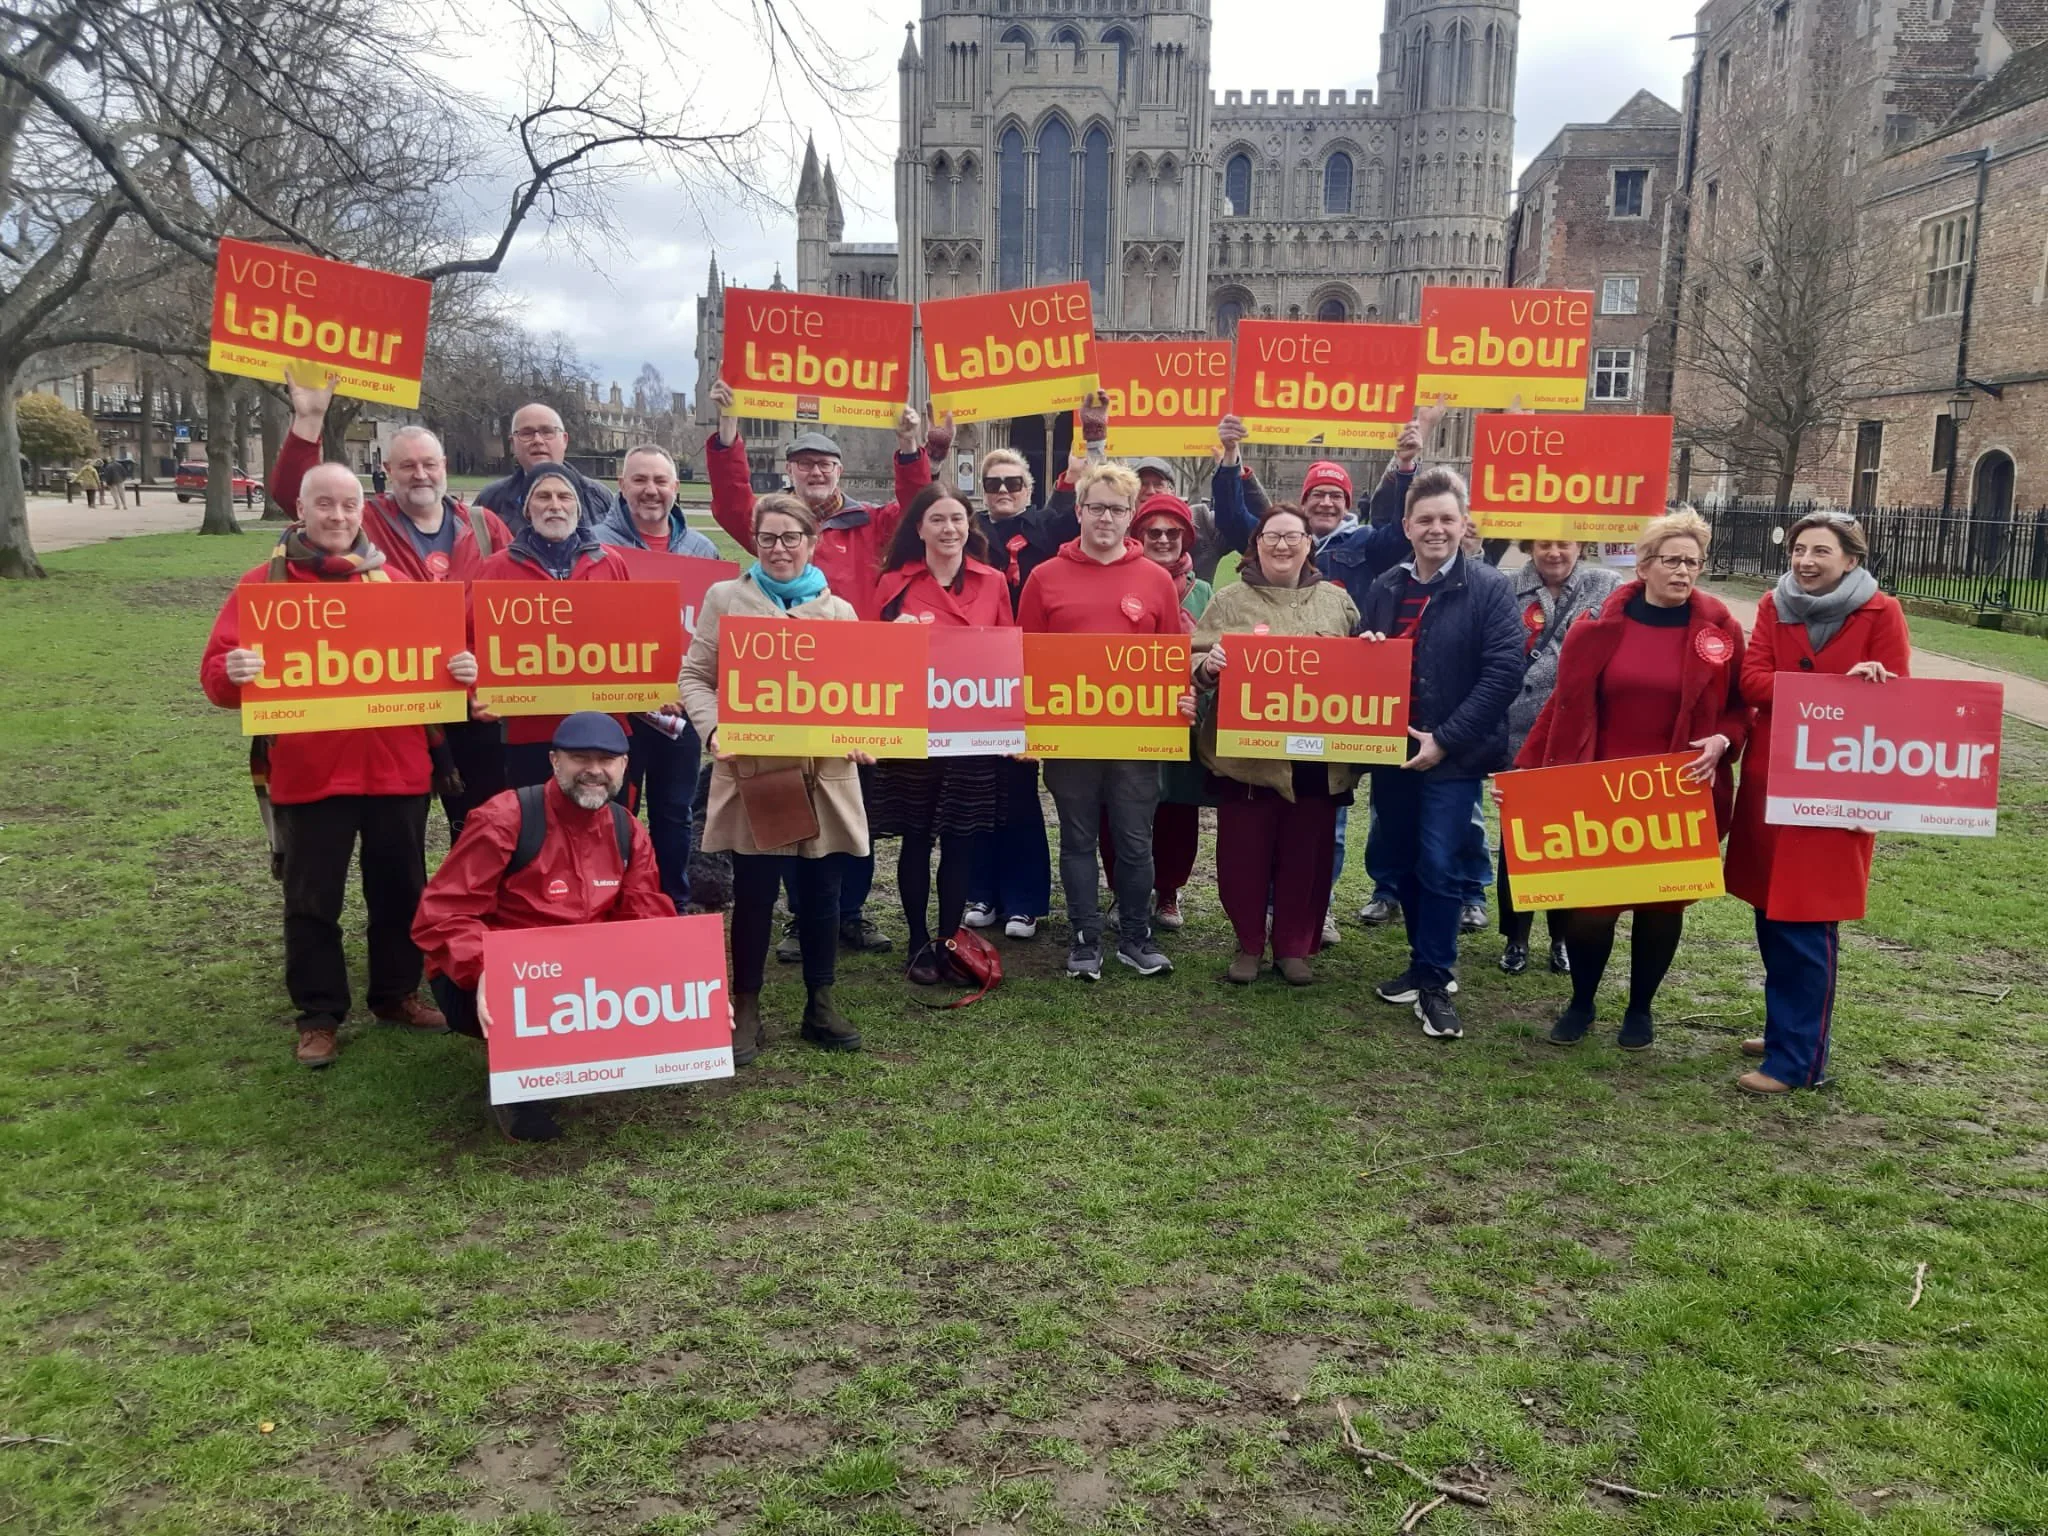 Daniel Zeichner, the MP for Cambridge, and Mayor Dr Nik Johnson, attended the launch today of the Labour manifesto for East Cambridgeshire District Council elections on May 4.